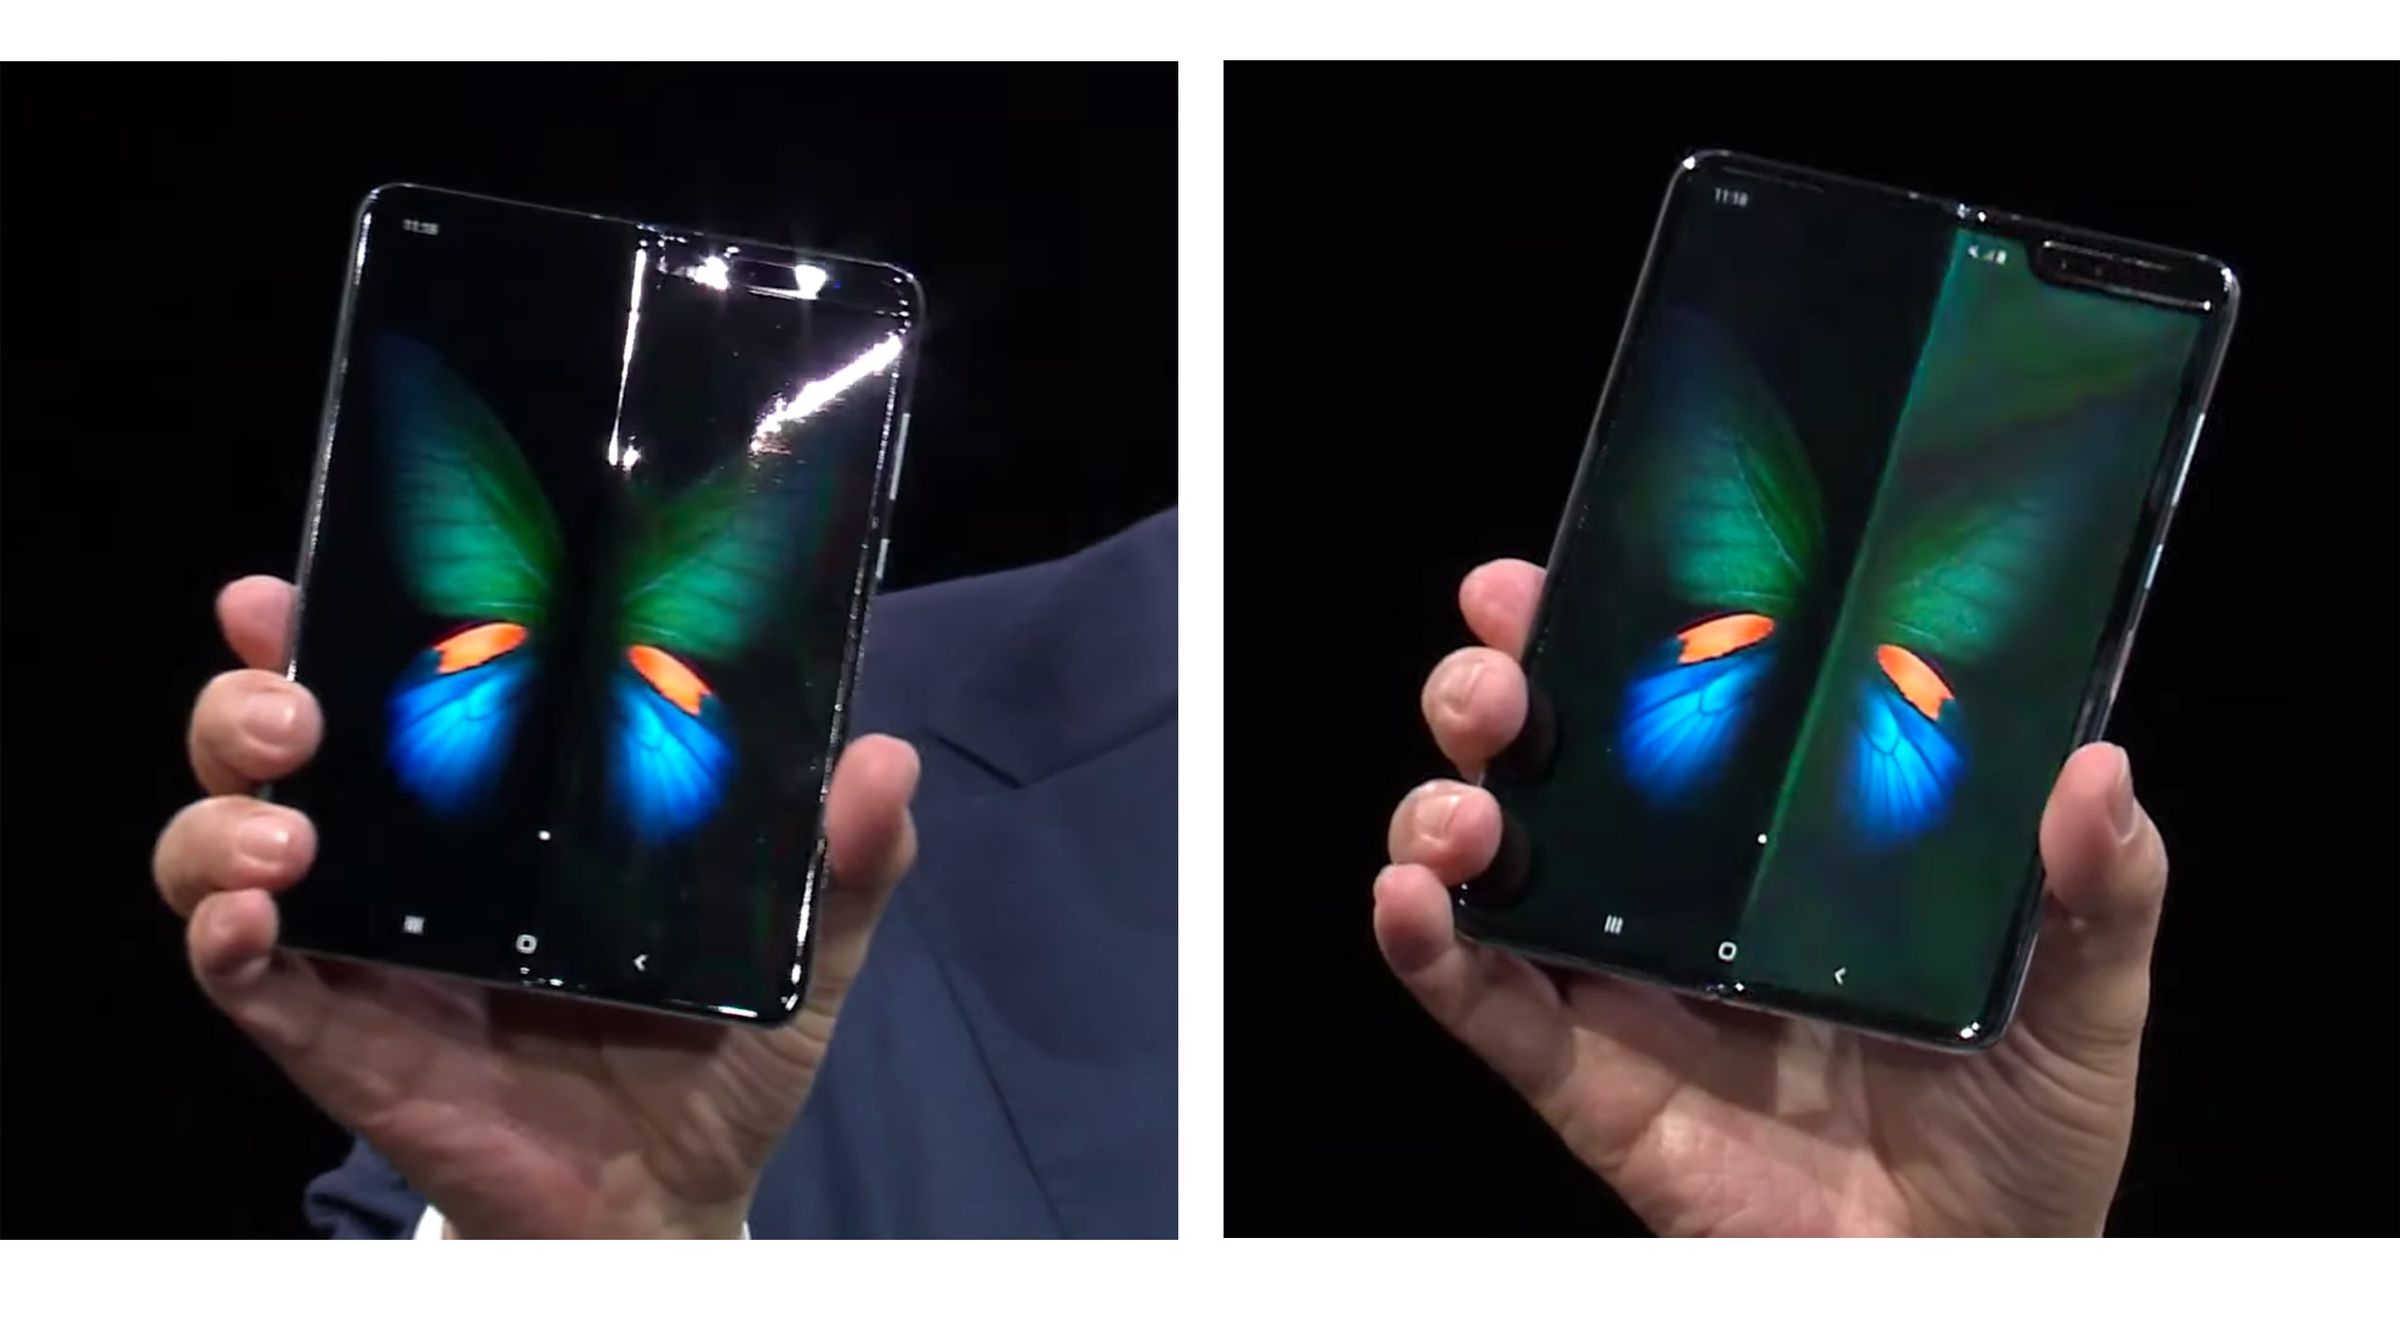 Samsung CEO DJ Koh holding up the Galaxy Fold. Note the highlight on the ridge in the middle and the way the two halves of the screen don’t perfectly cohere into one.